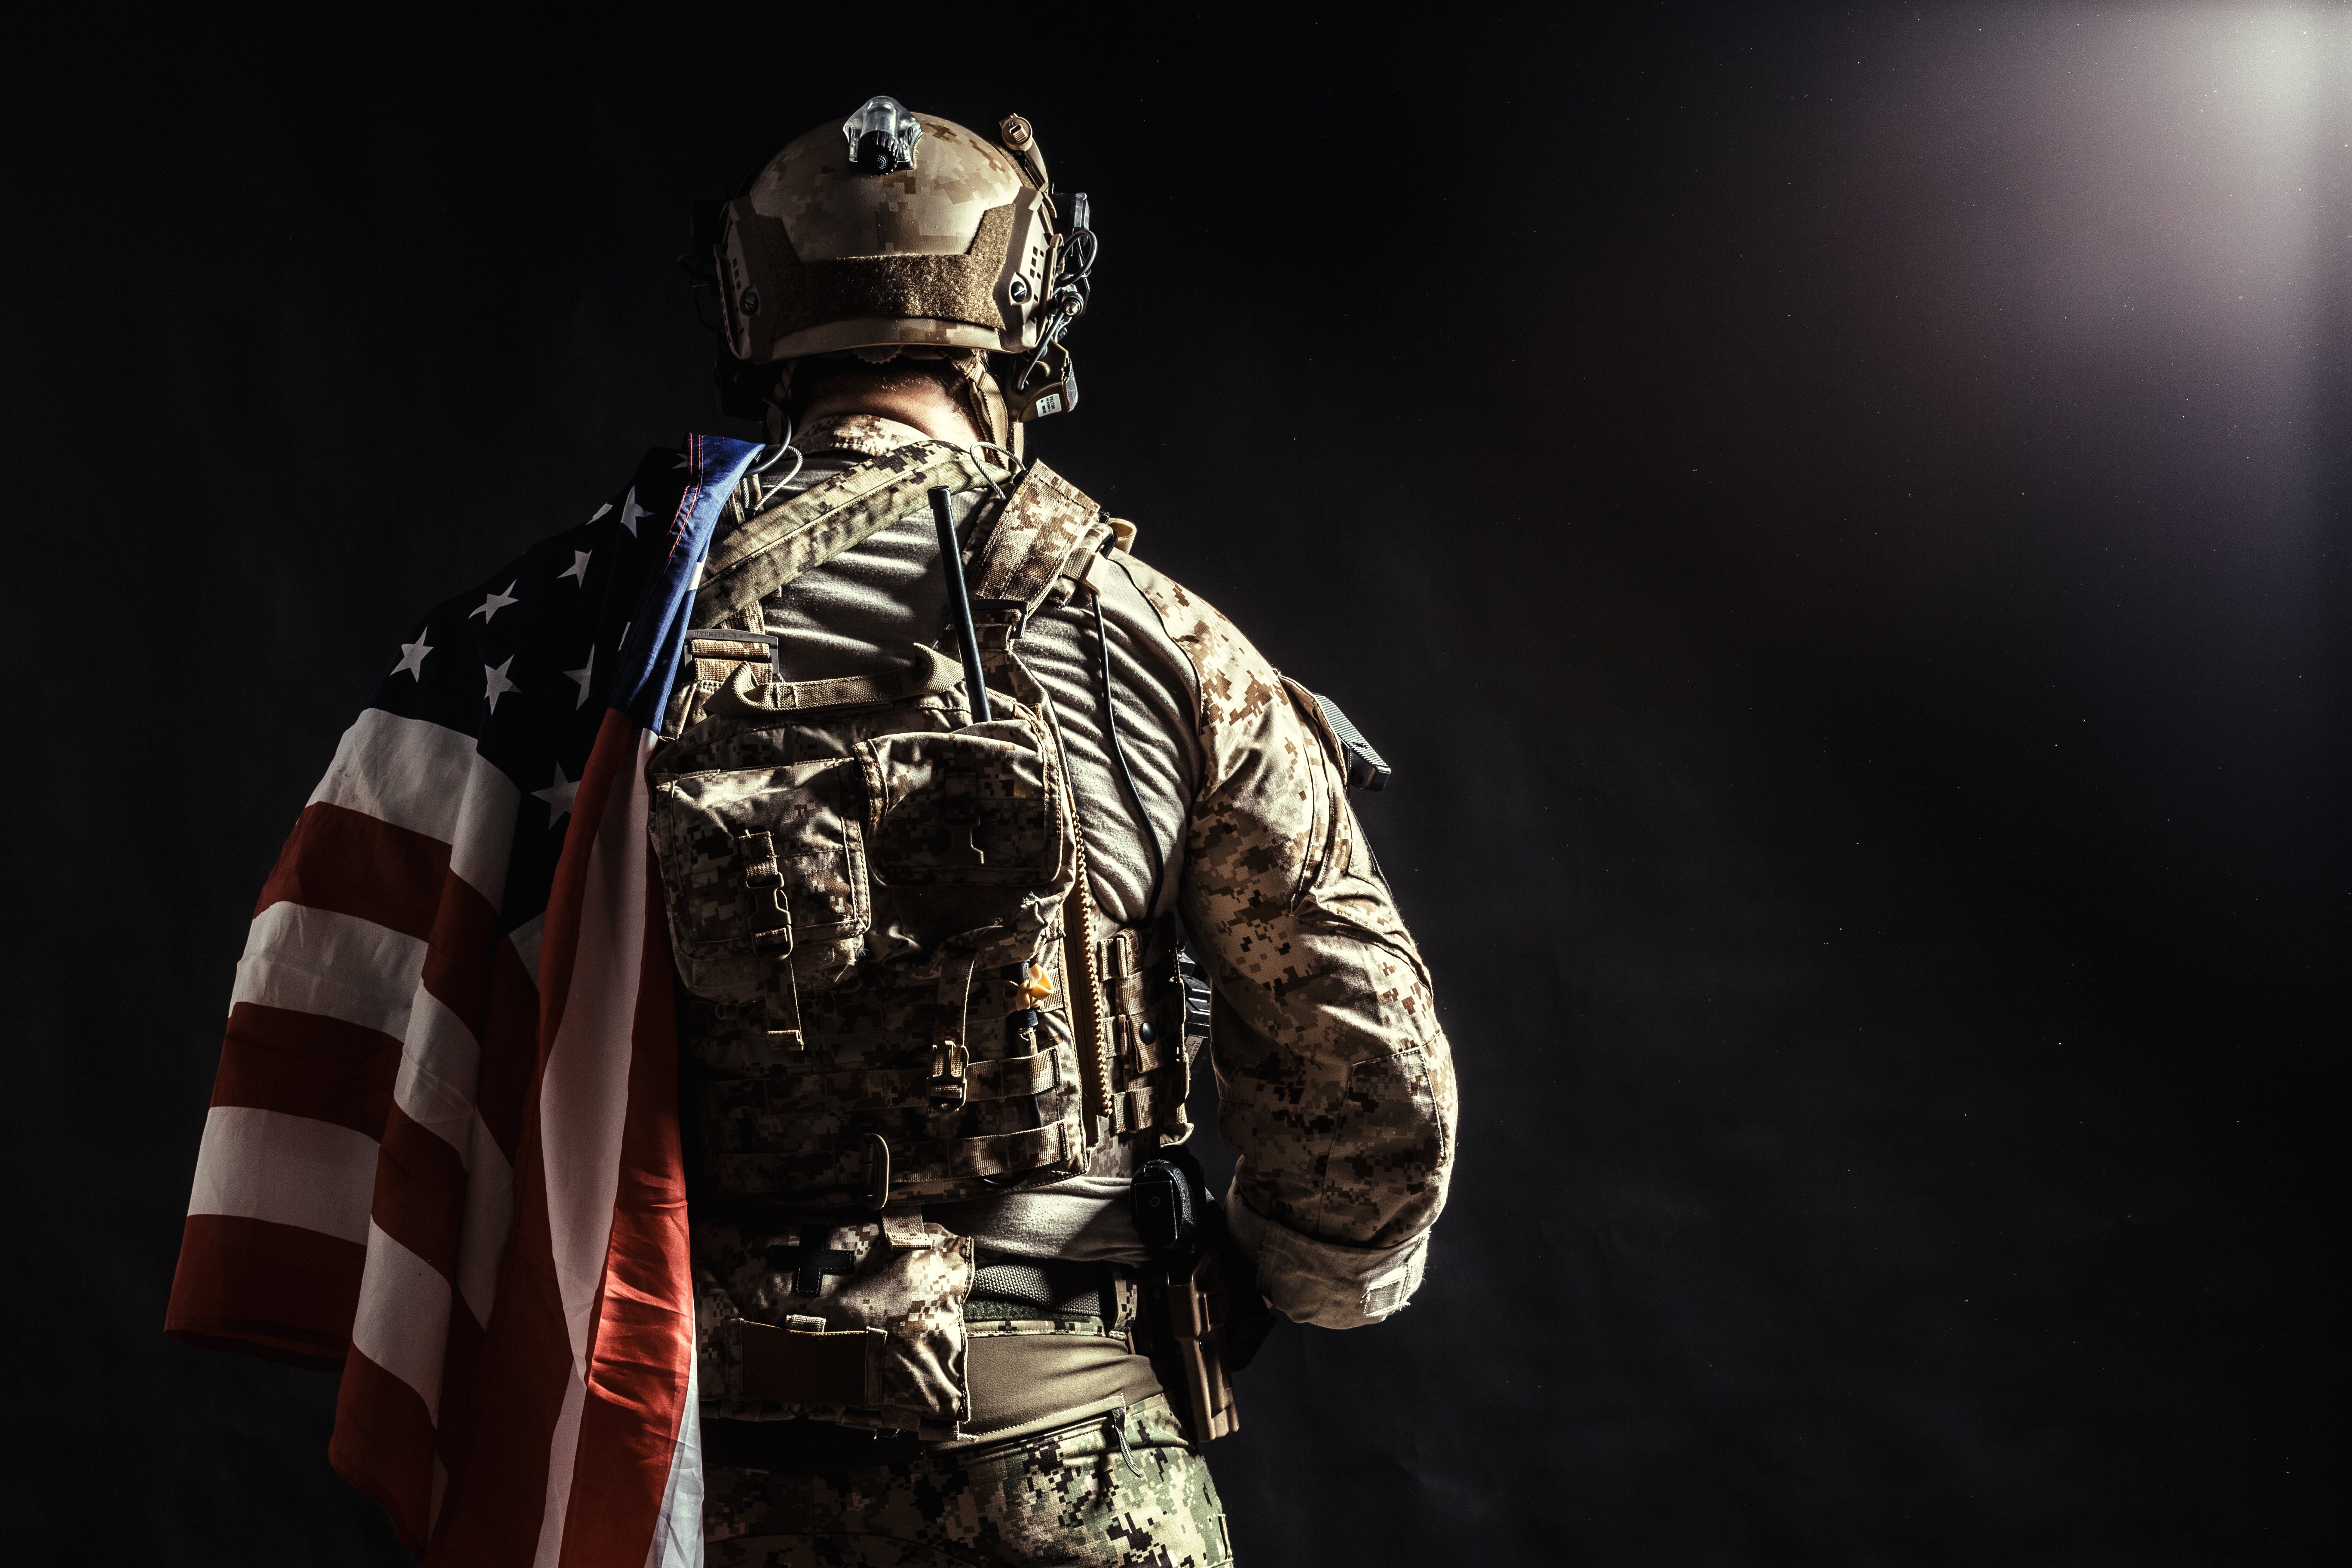 A soldier with the United States of America (U.S.A.) flag on his shoulder. │Source: Shutterstock